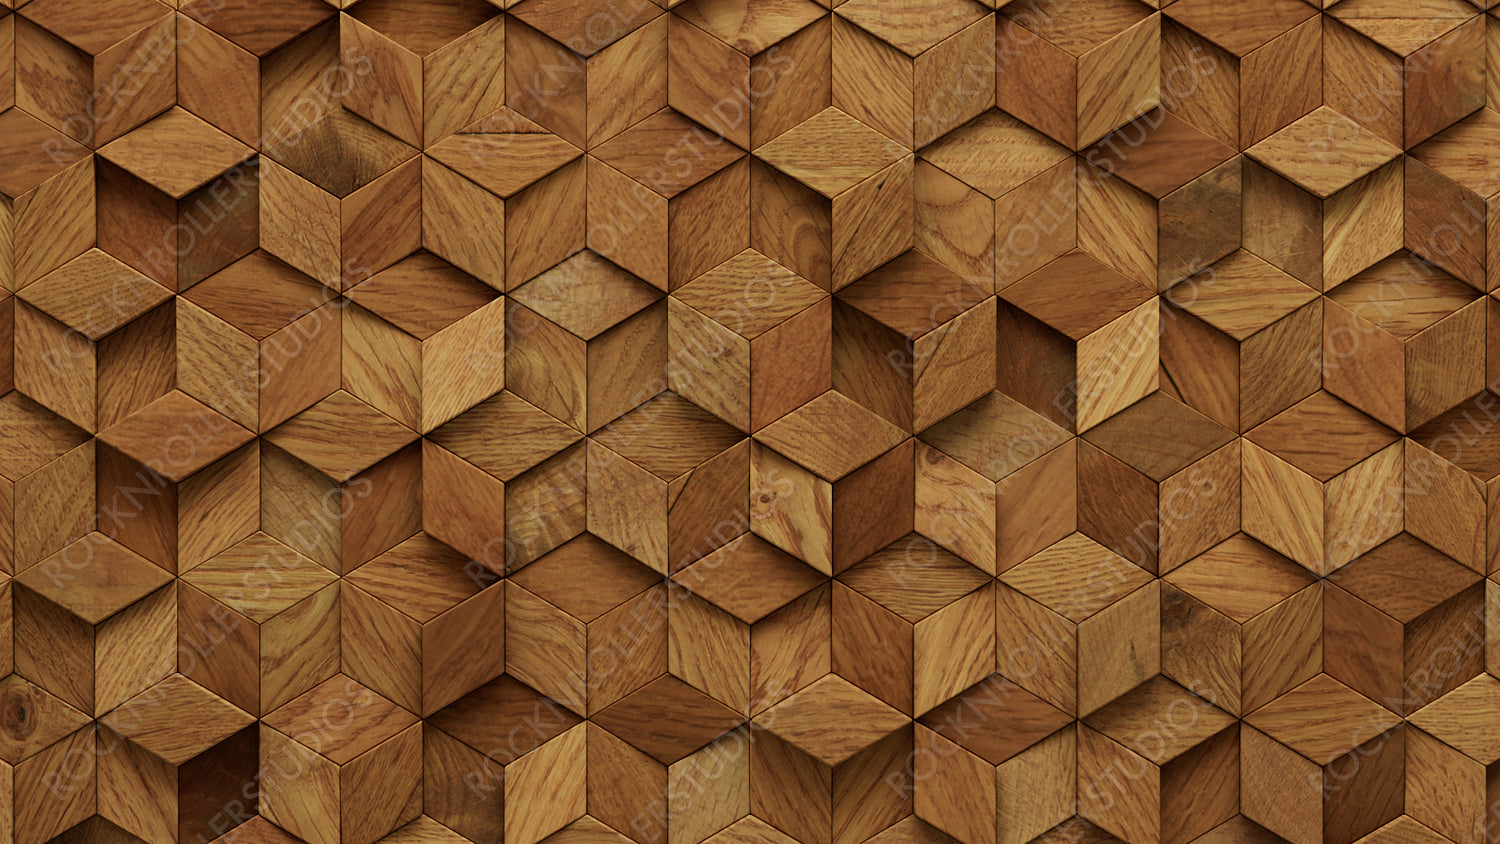 Wood Block Wall background. Mosaic Wallpaper with Light and Dark Timber Diamond tile pattern. 3D Render